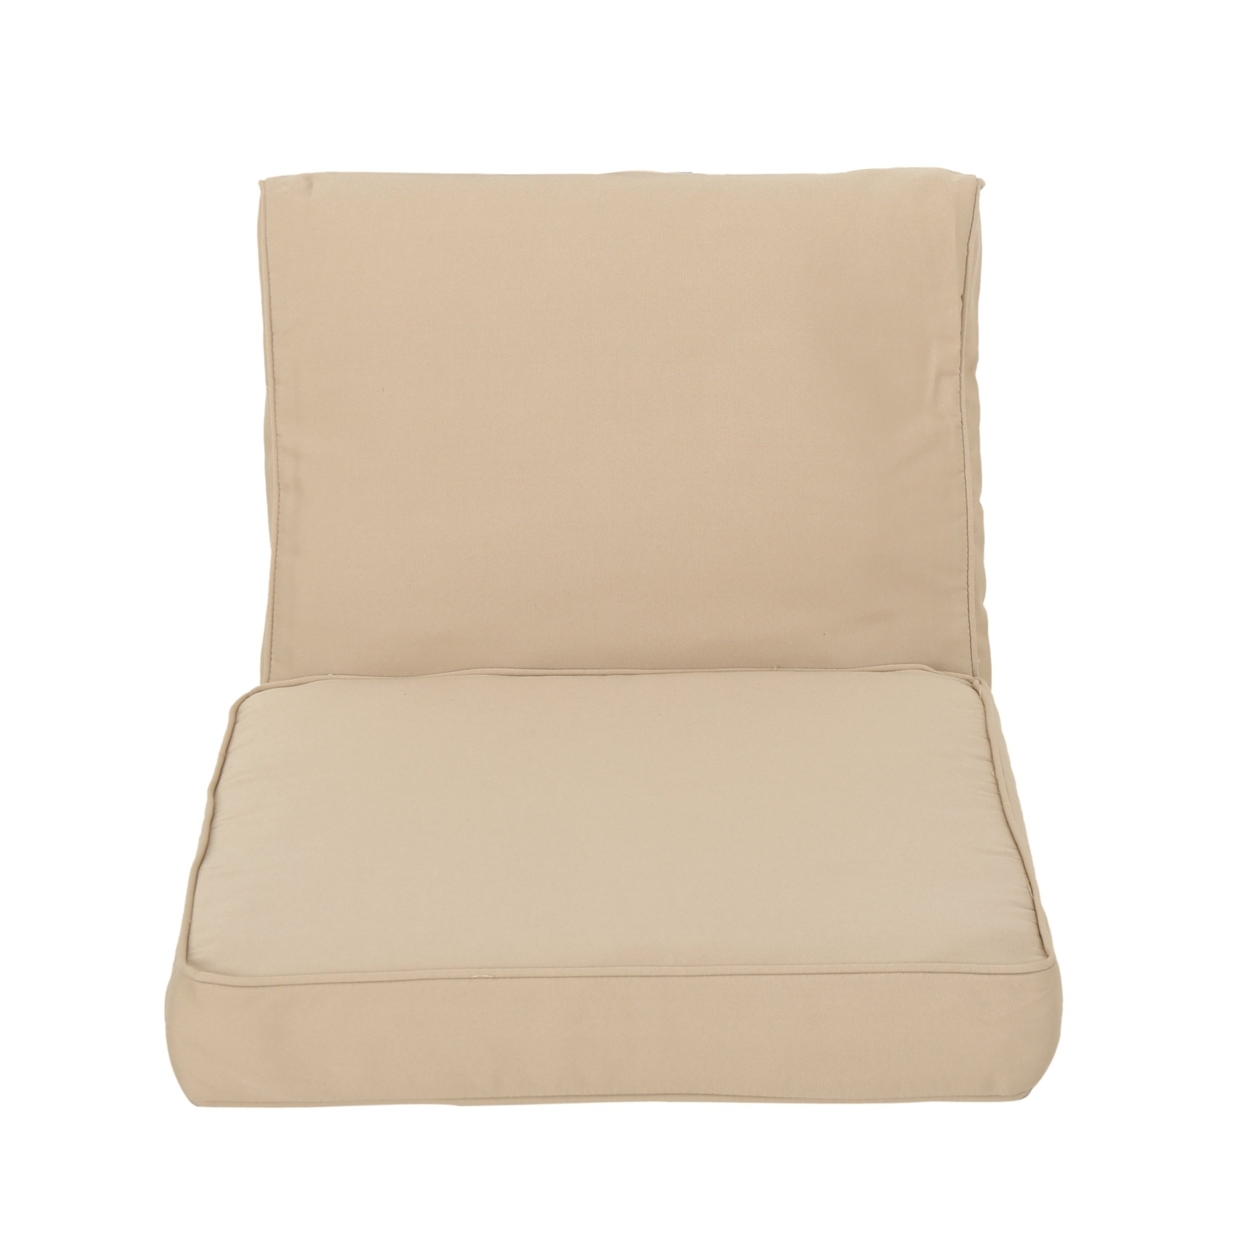 Atiyah Outdoor Water Resistant Fabric Club Chair Cushions With Piping - Tan